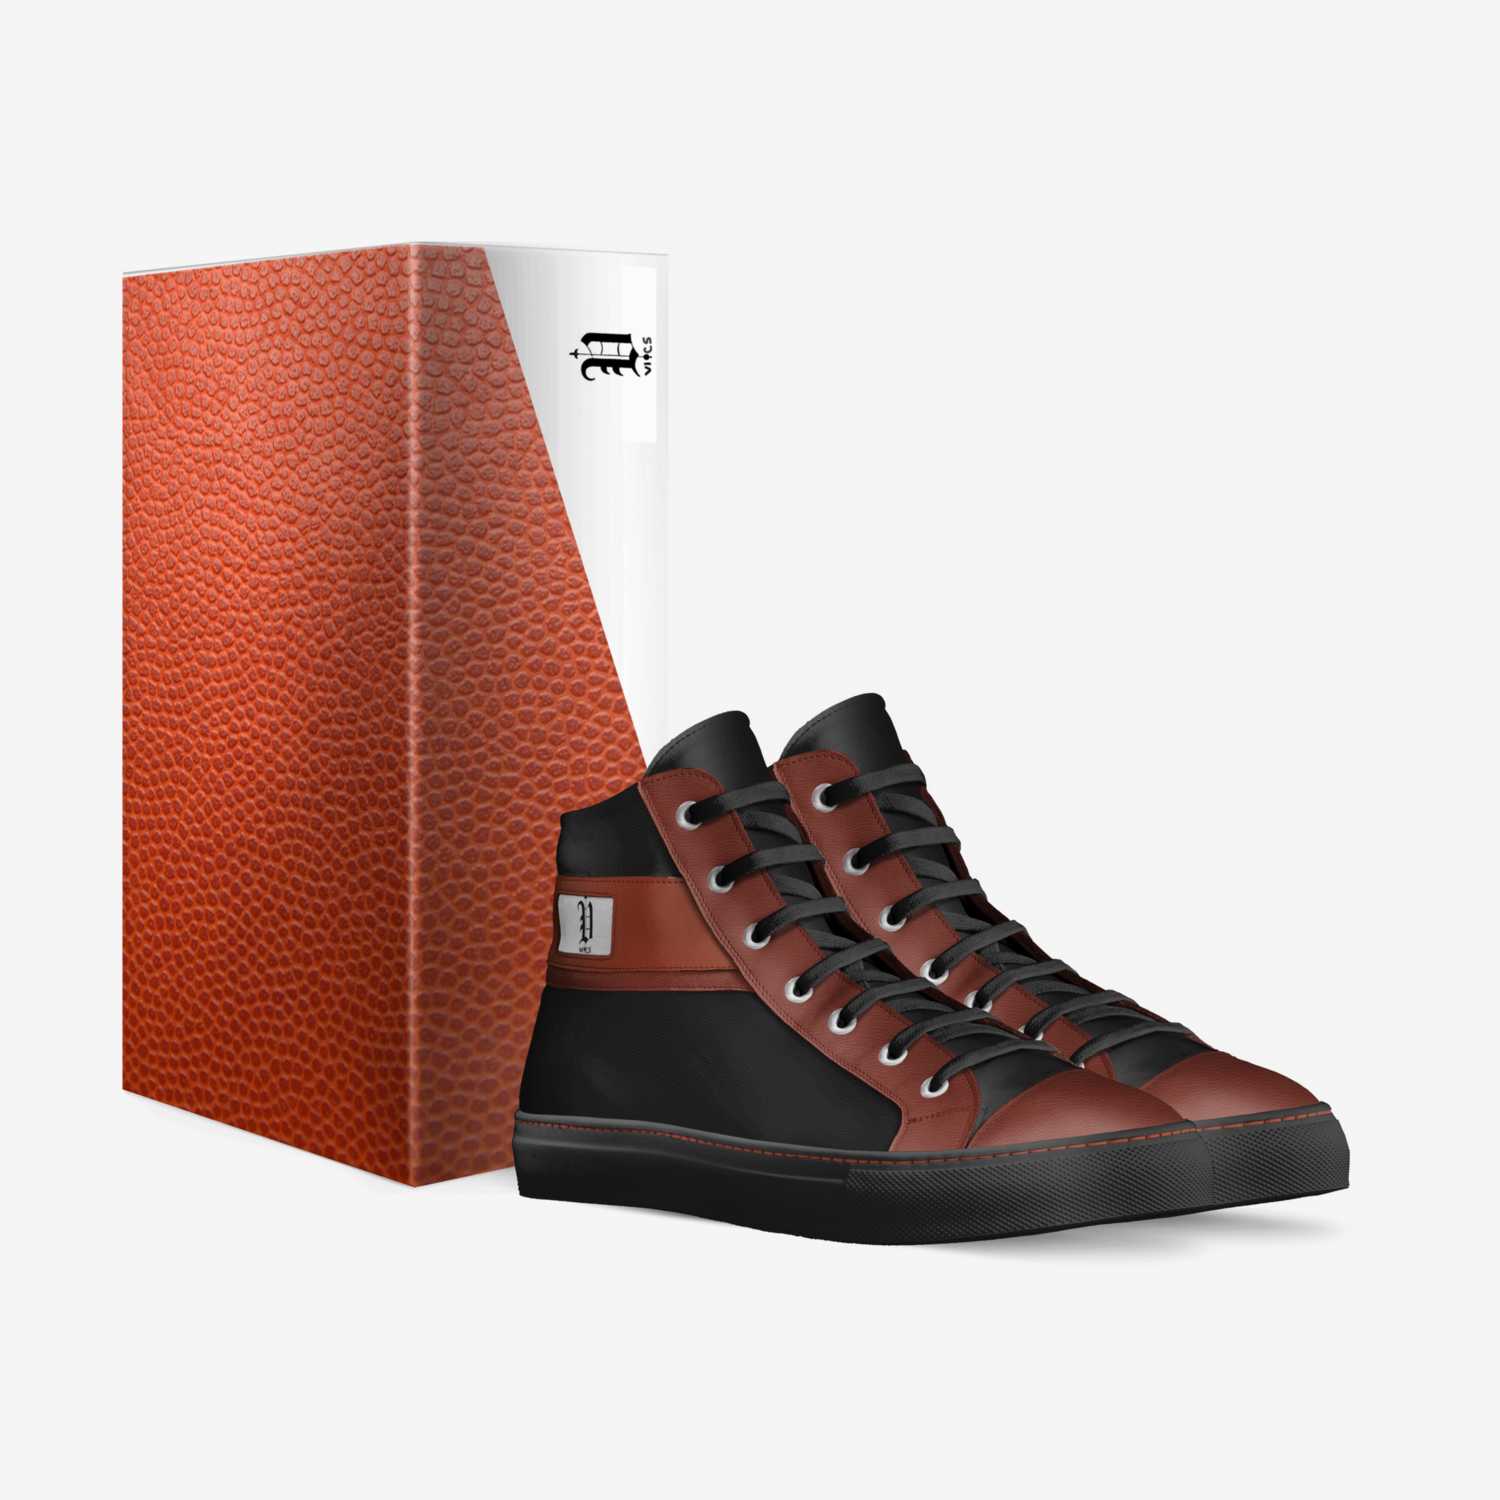 vics orcale 2 custom made in Italy shoes by Brayden Murphy | Box view